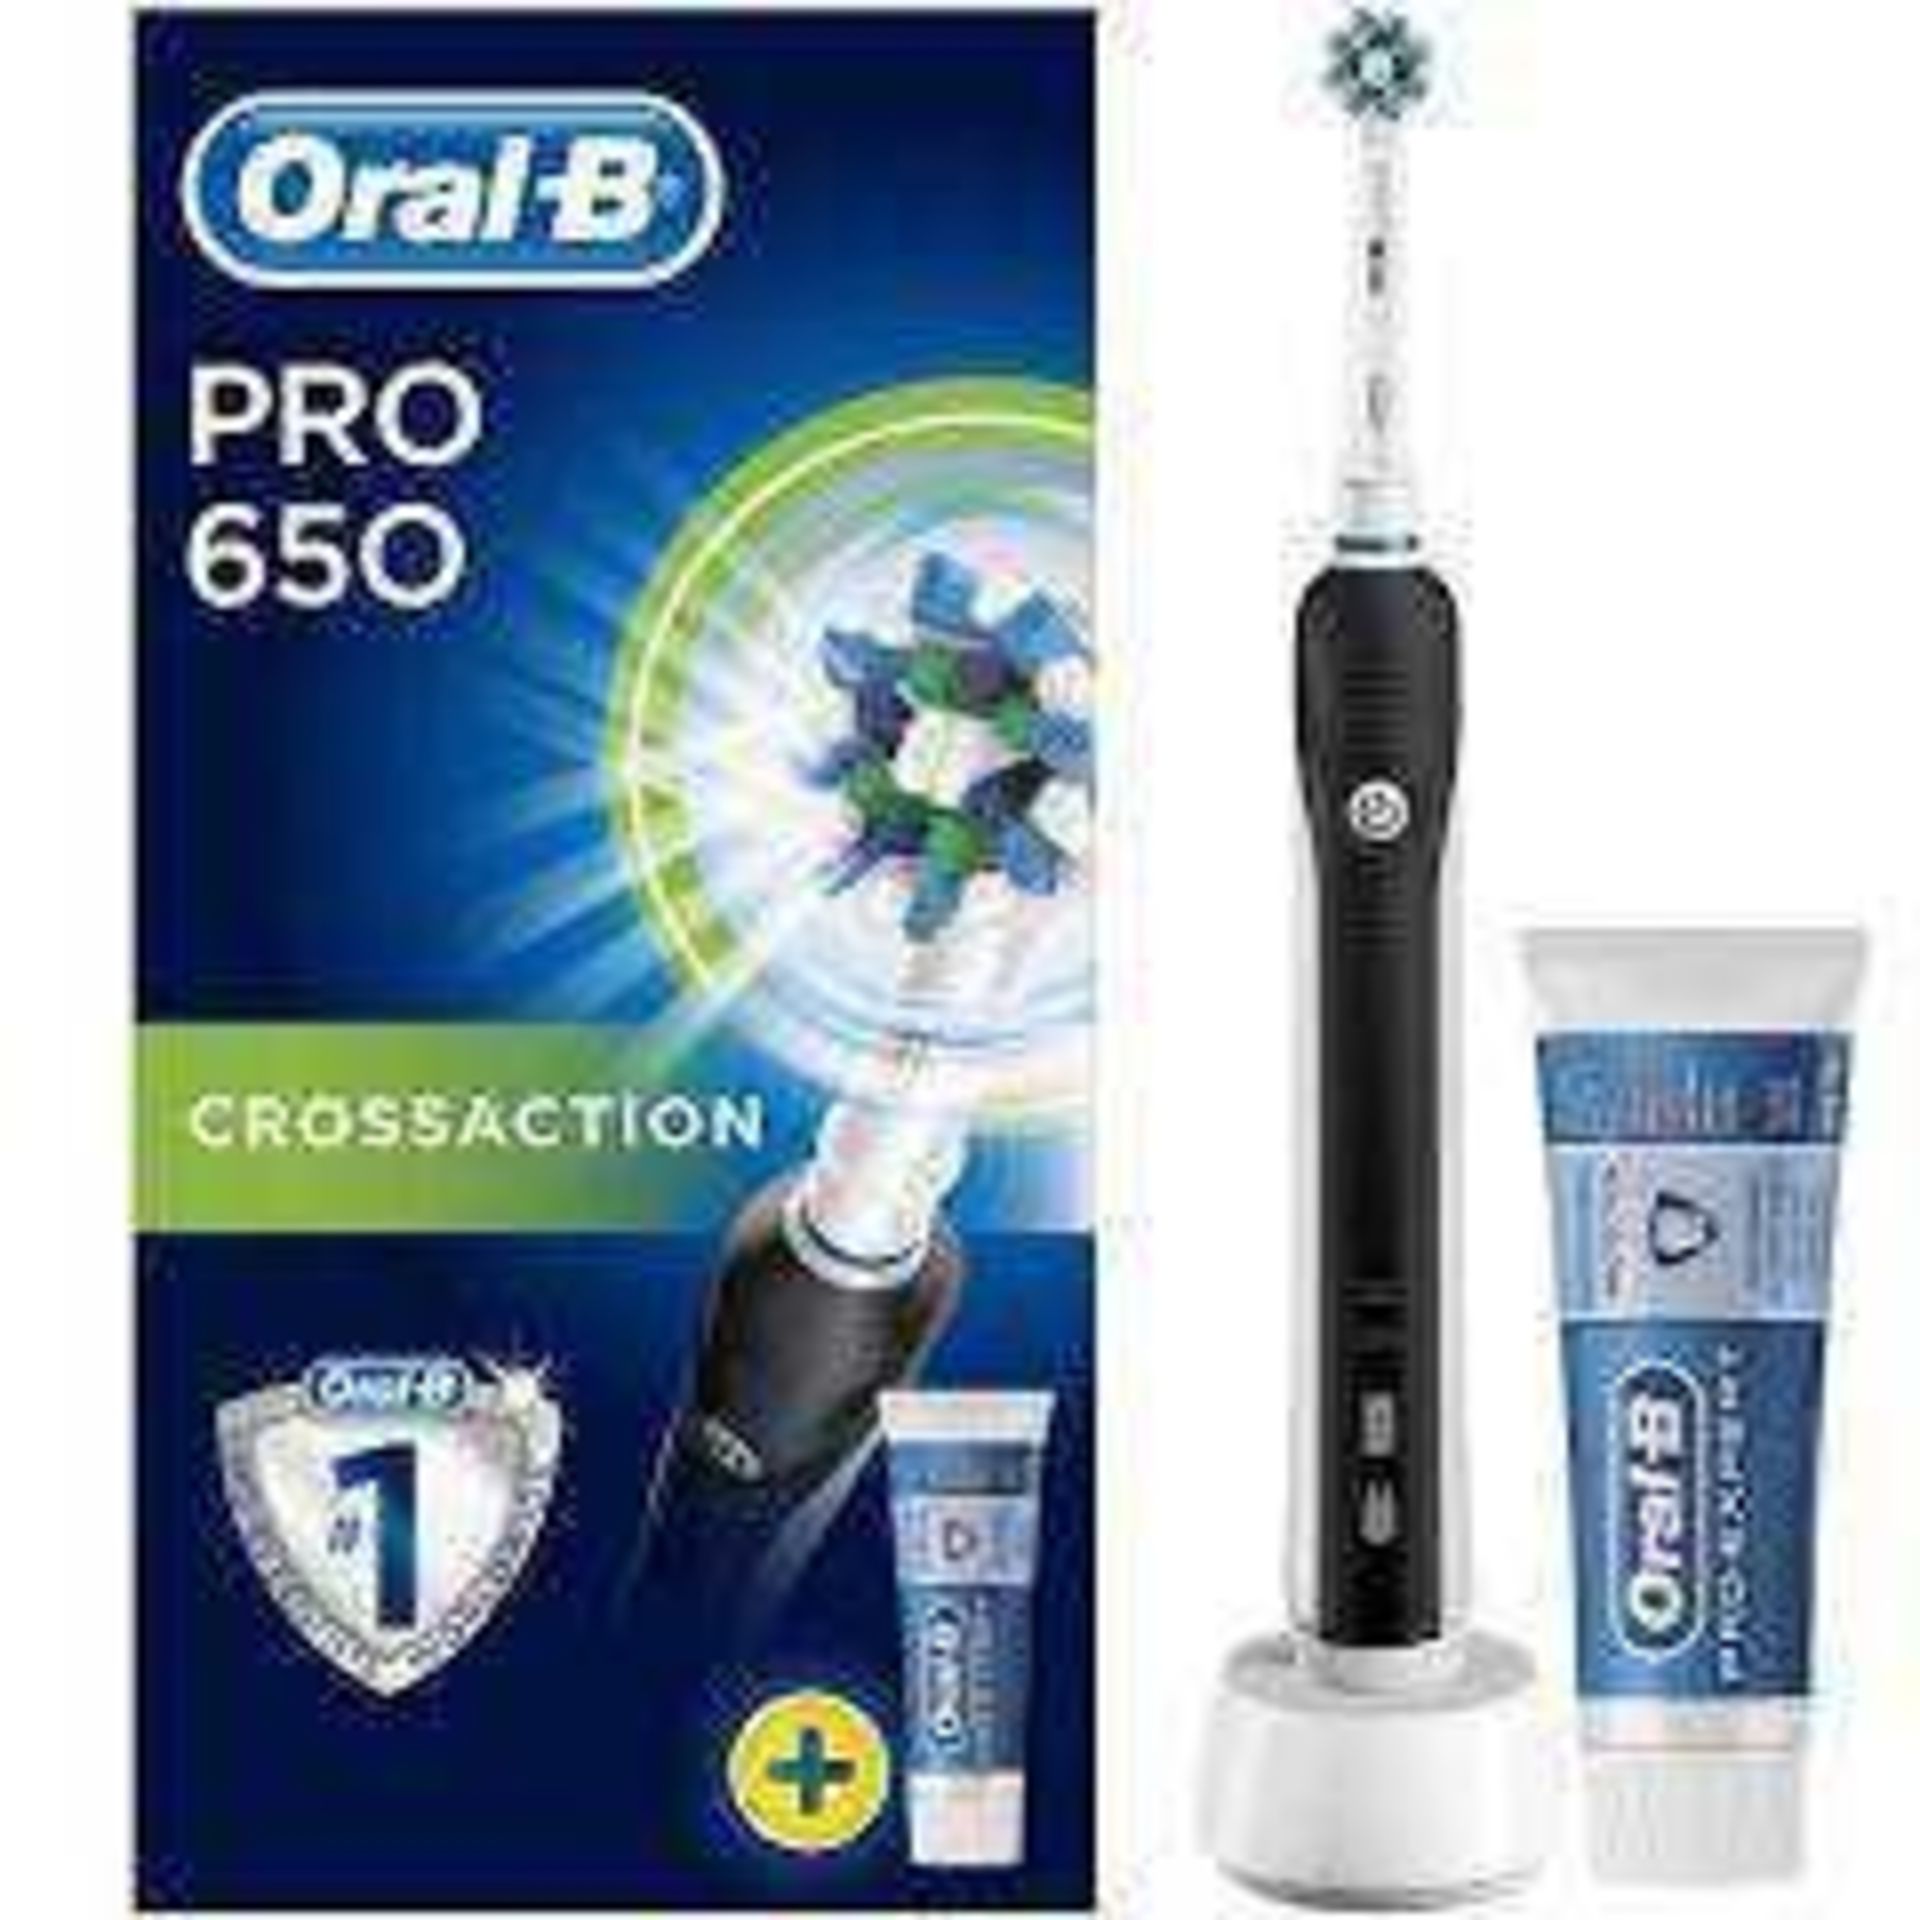 Combined RRP £180 Lot To Contain 3 Boxed Oral B Pr